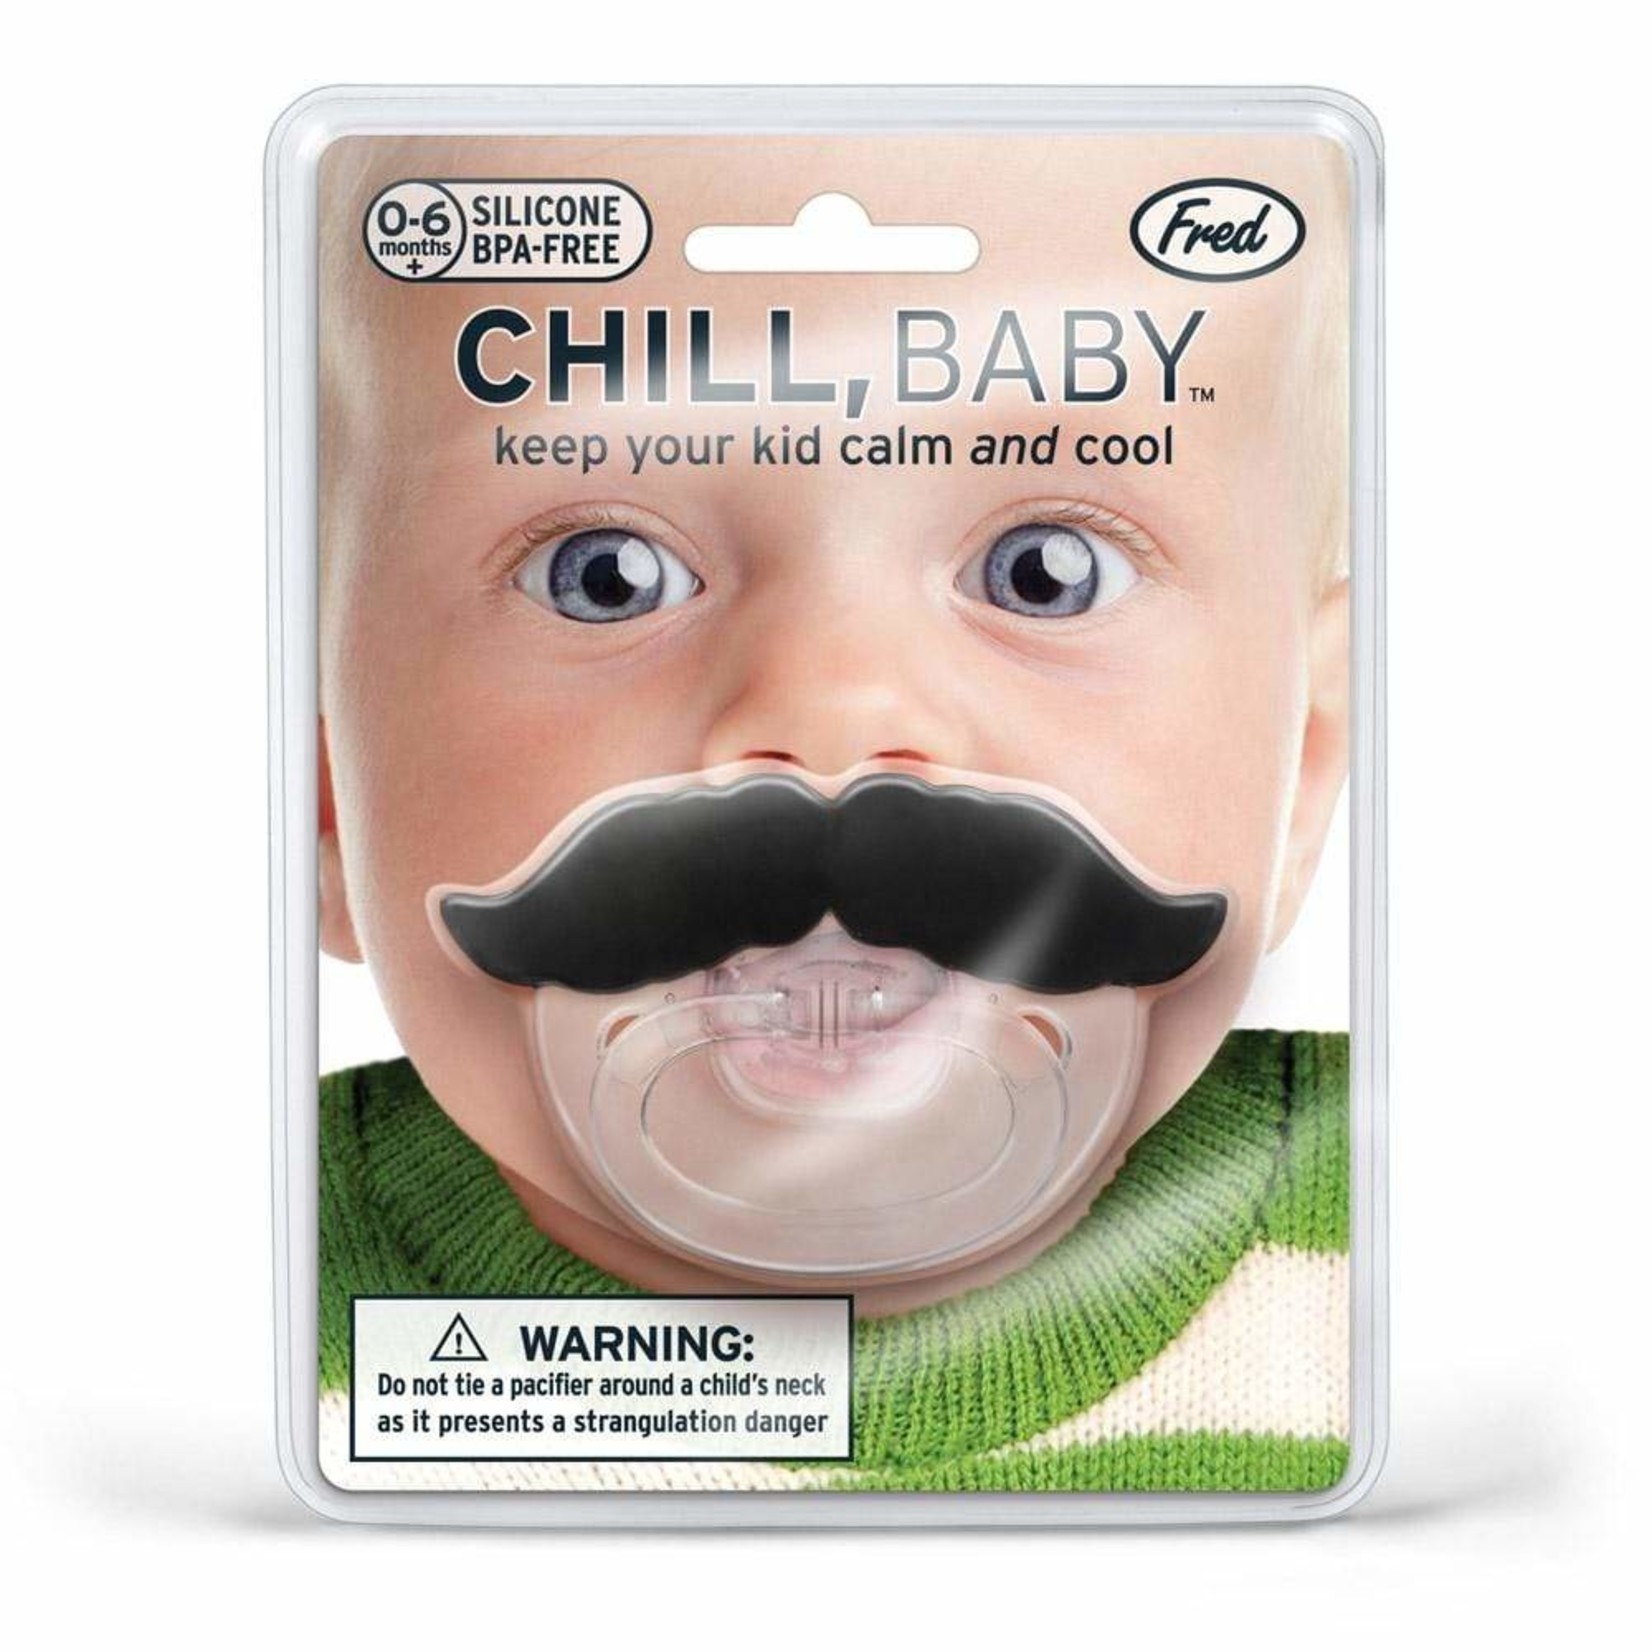 Fred Chill  Baby Pacifier